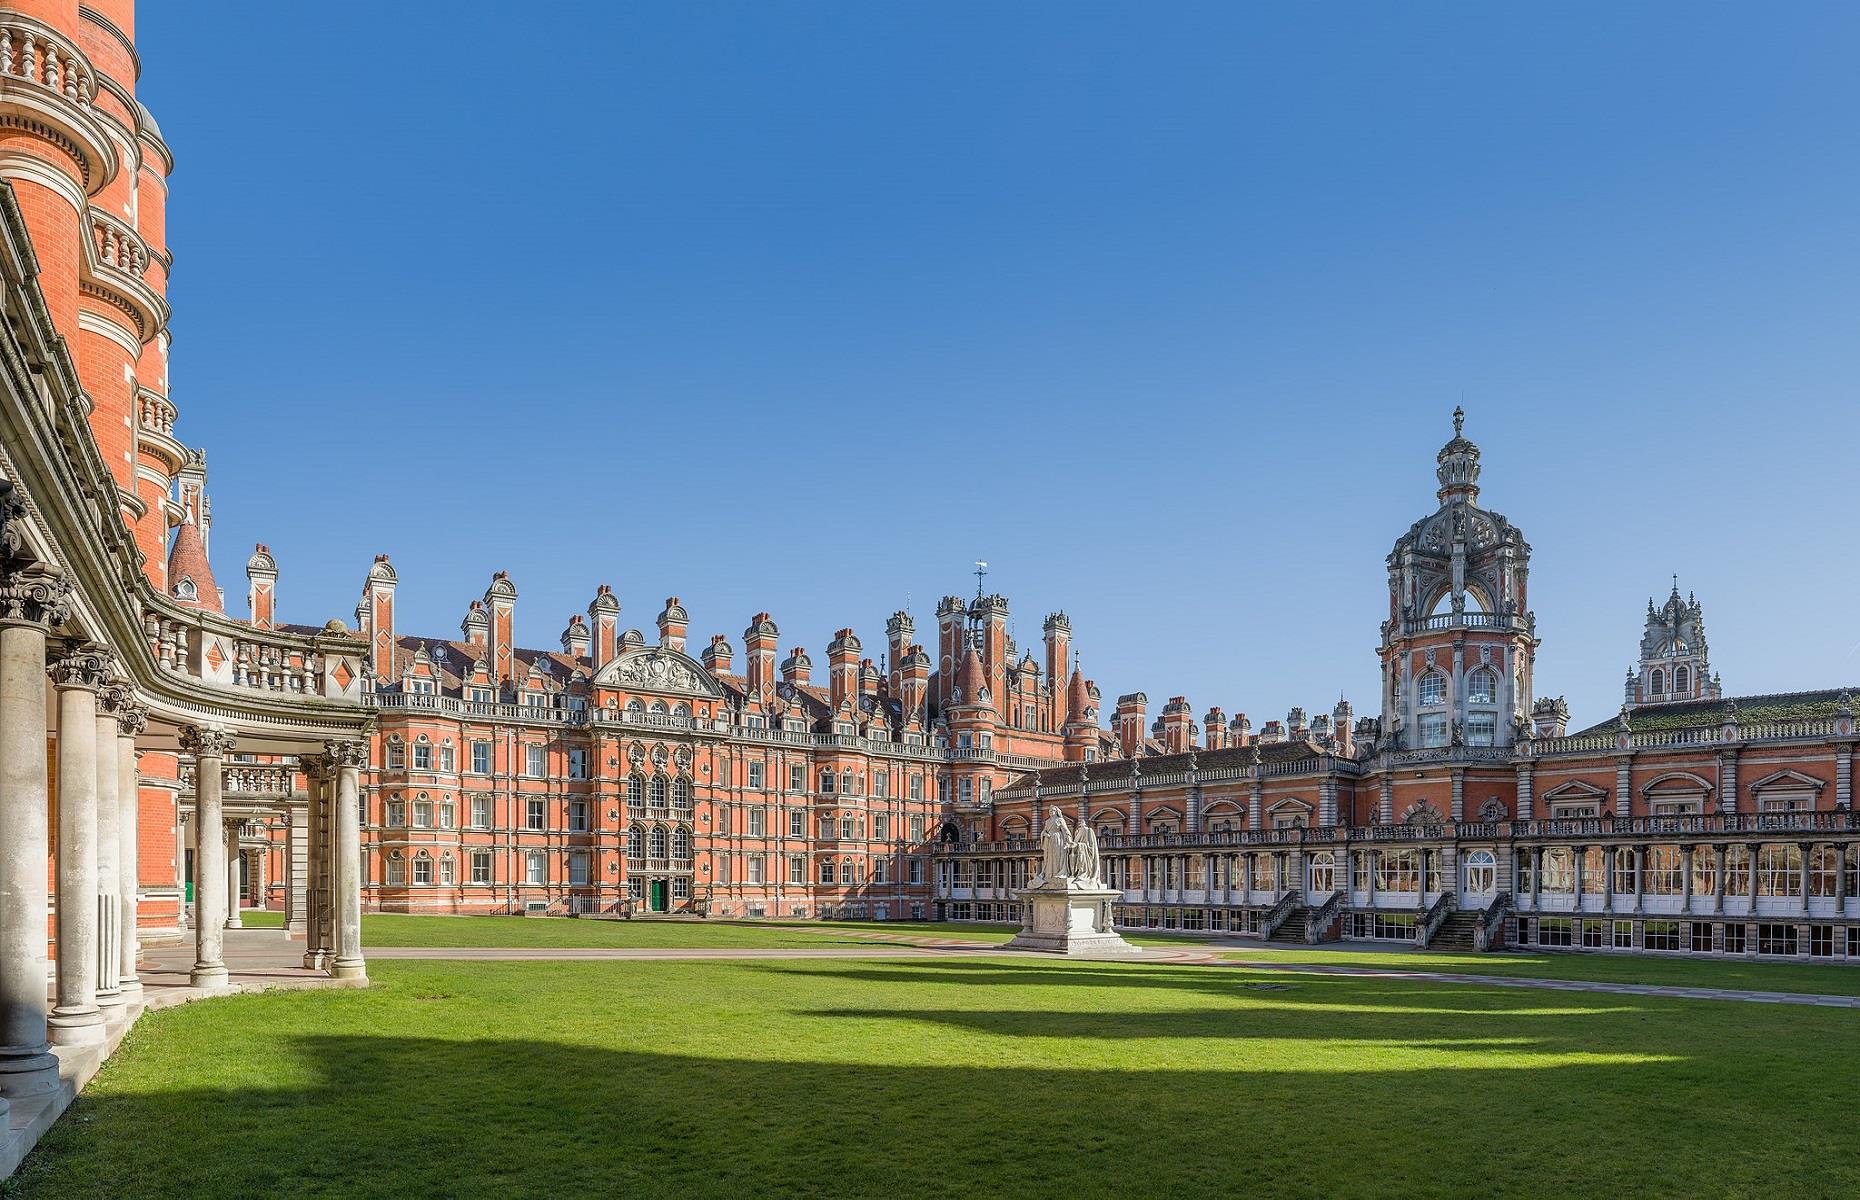 <p>As iconic as it is spectacular, Royal Holloway, part of the University of London, can be found in Surrey, UK, and was founded in 1879. The institution was among the first in Britain to allow women to access higher education. The Founder's Building was unveiled by Queen Victoria in 1886 and it remains the hub of the campus to this day. Highlights include the Royal Holloway Chapel and the Picture Gallery, which contains a fine collection of Victorian paintings. Guided tours are available and they also welcome visitors to their <a href="https://www.royalholloway.ac.uk/about-us/art-collections/visit-us">Picture Gallery and Art Collections</a> throughout the year.</p>